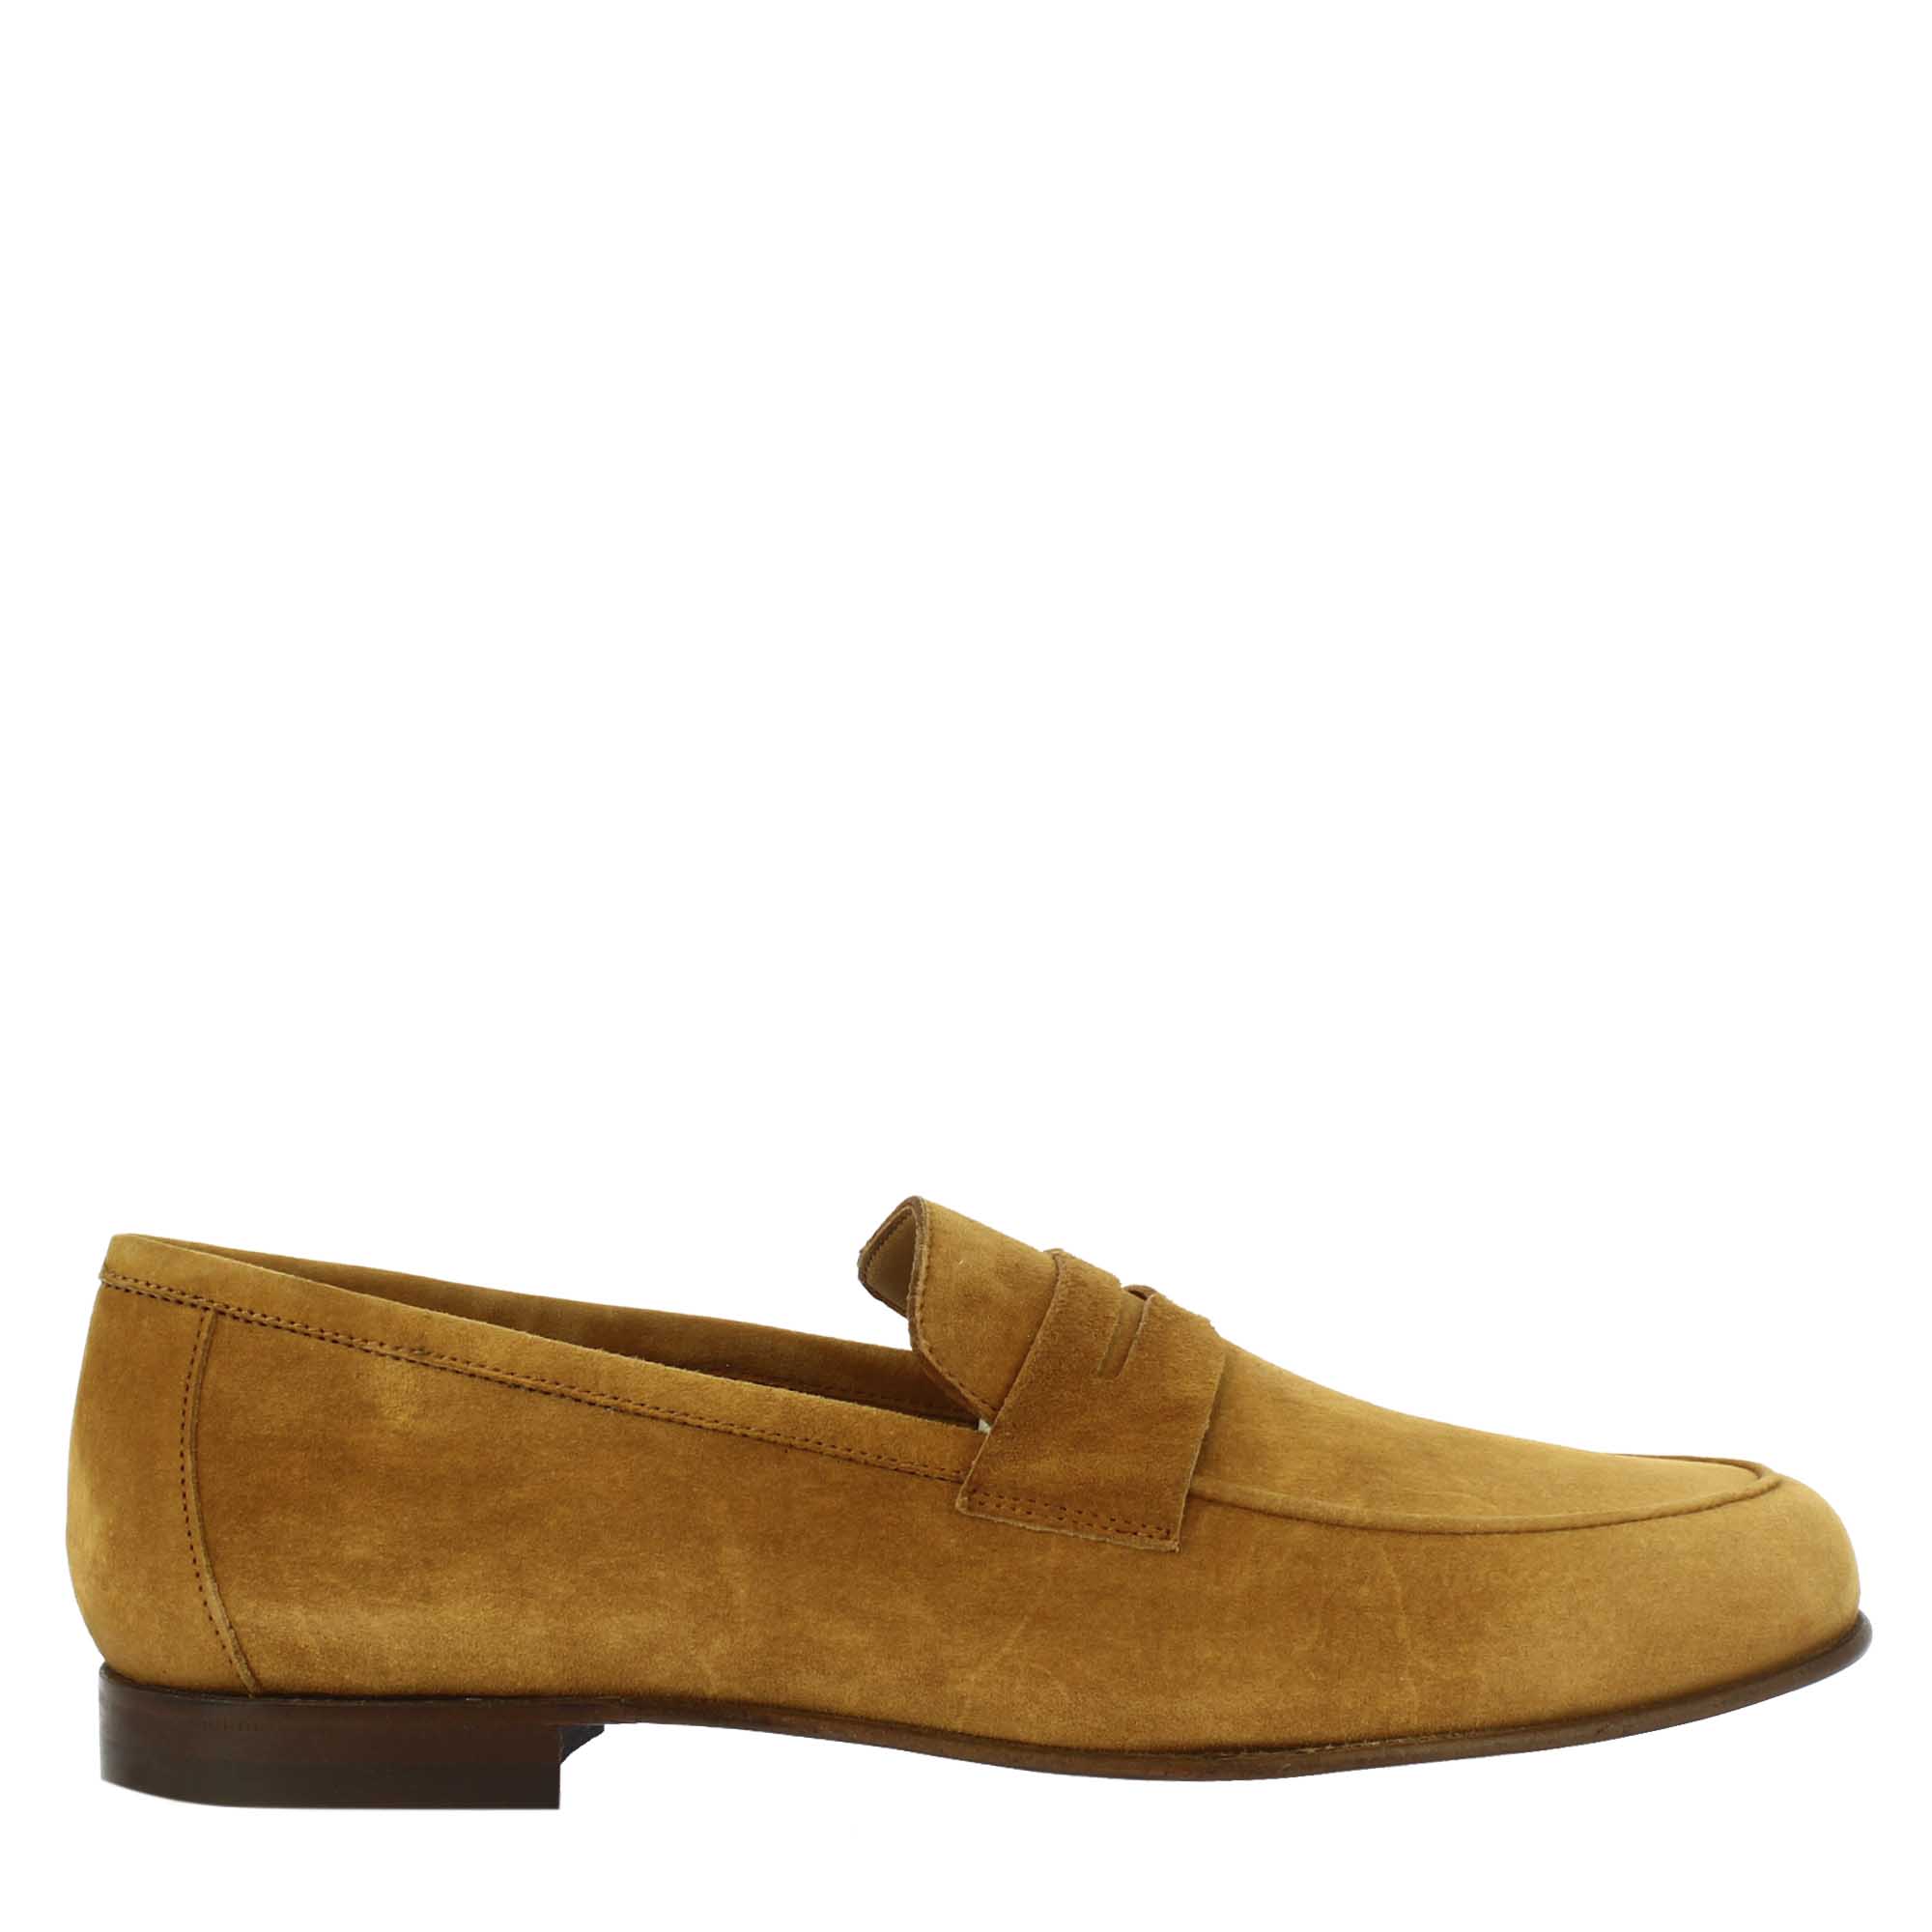 slip-on loafers in brown suede leather